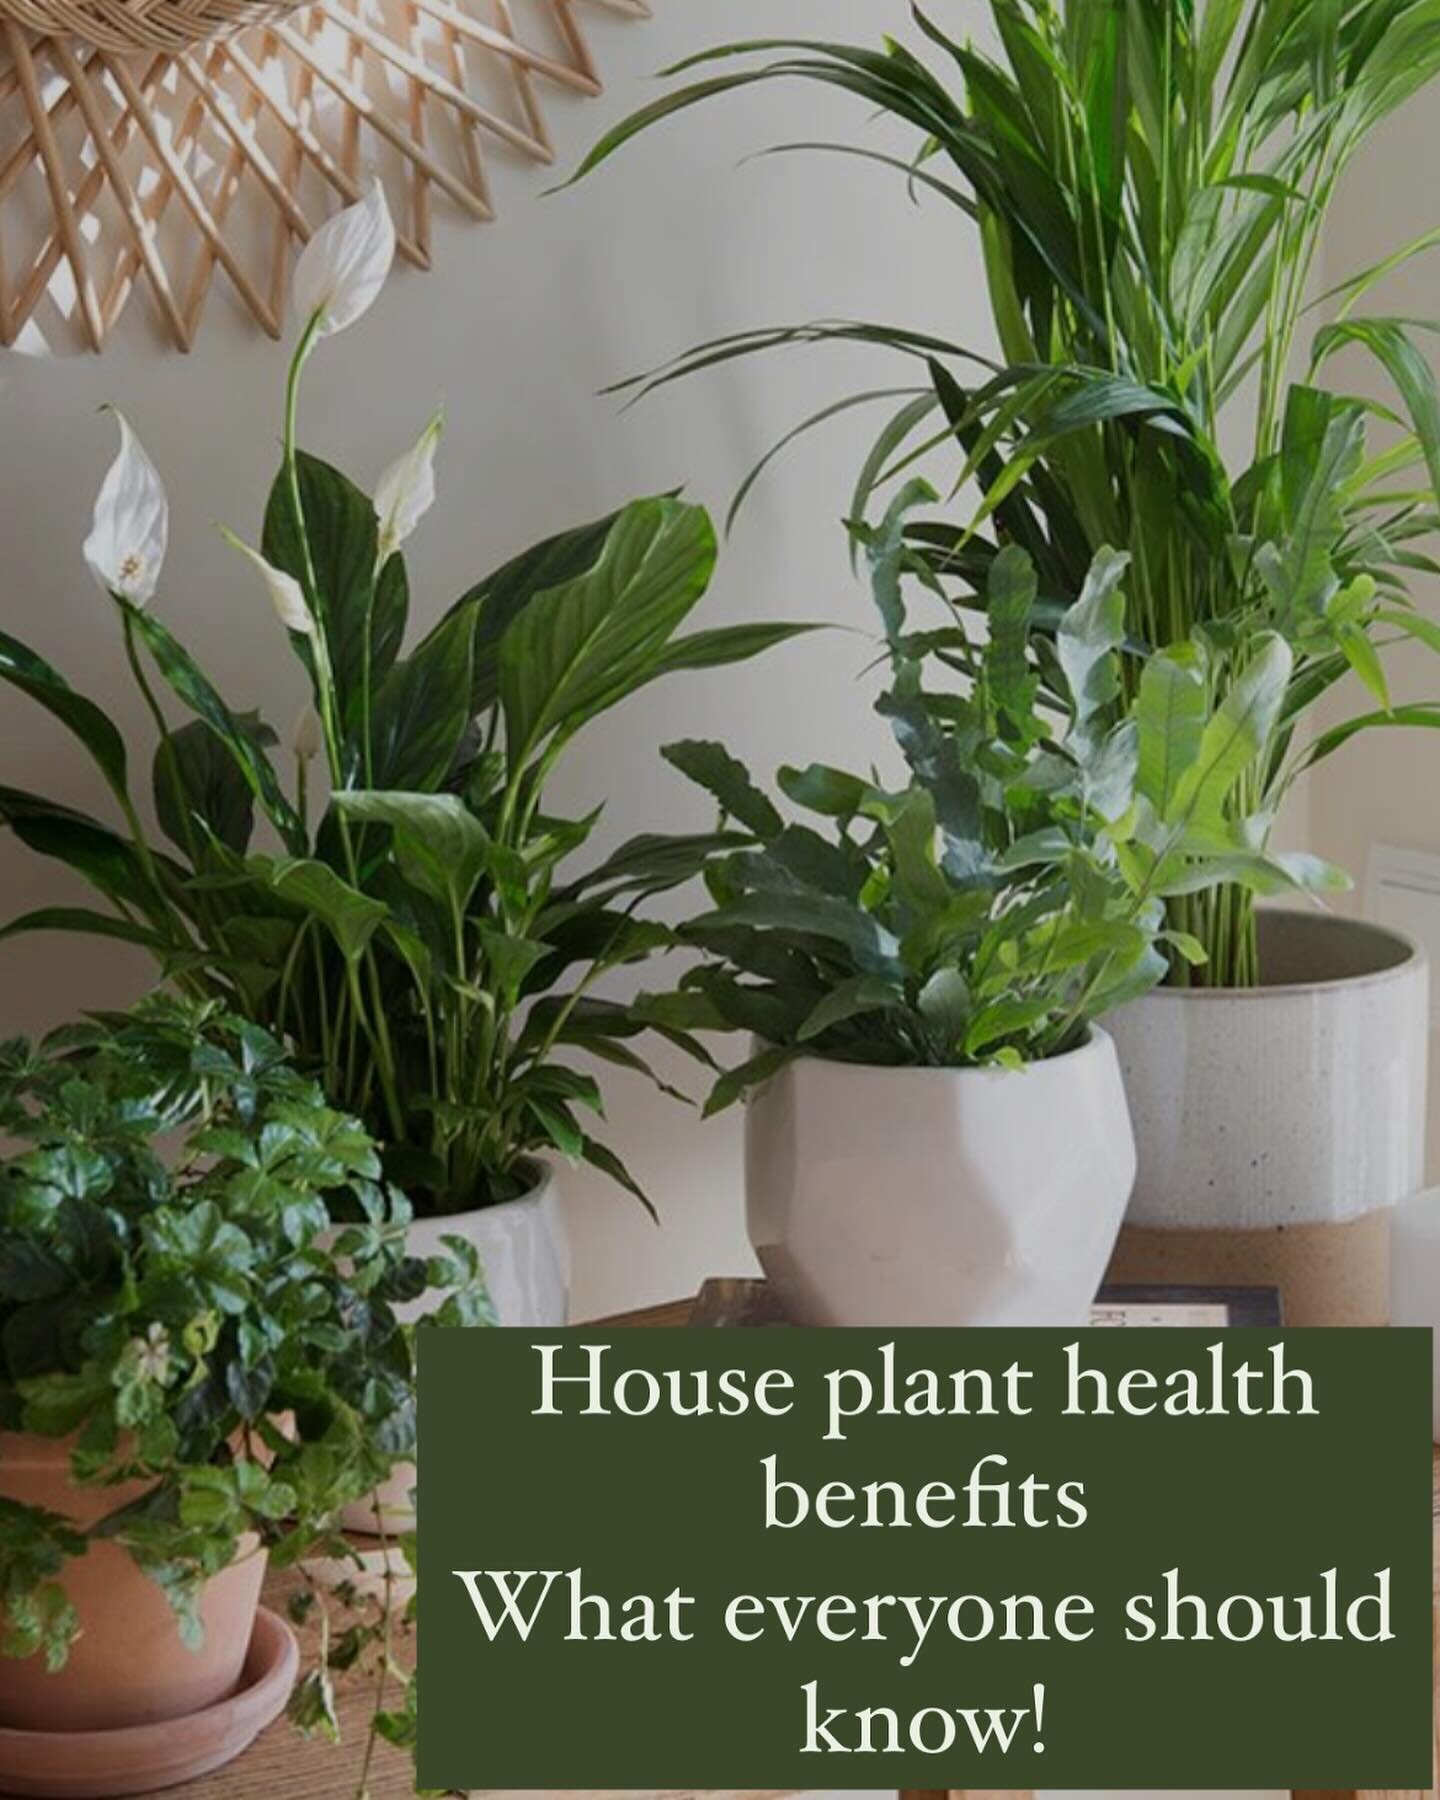 In this April Newsletter for Luxe Health Coaching, Coach Vivian McVey explores the many health benefits that come from indoor plants and how you too can master a green thumb to reap the benefits!
Click here to read:
https://www.luxehealthcoaching.com